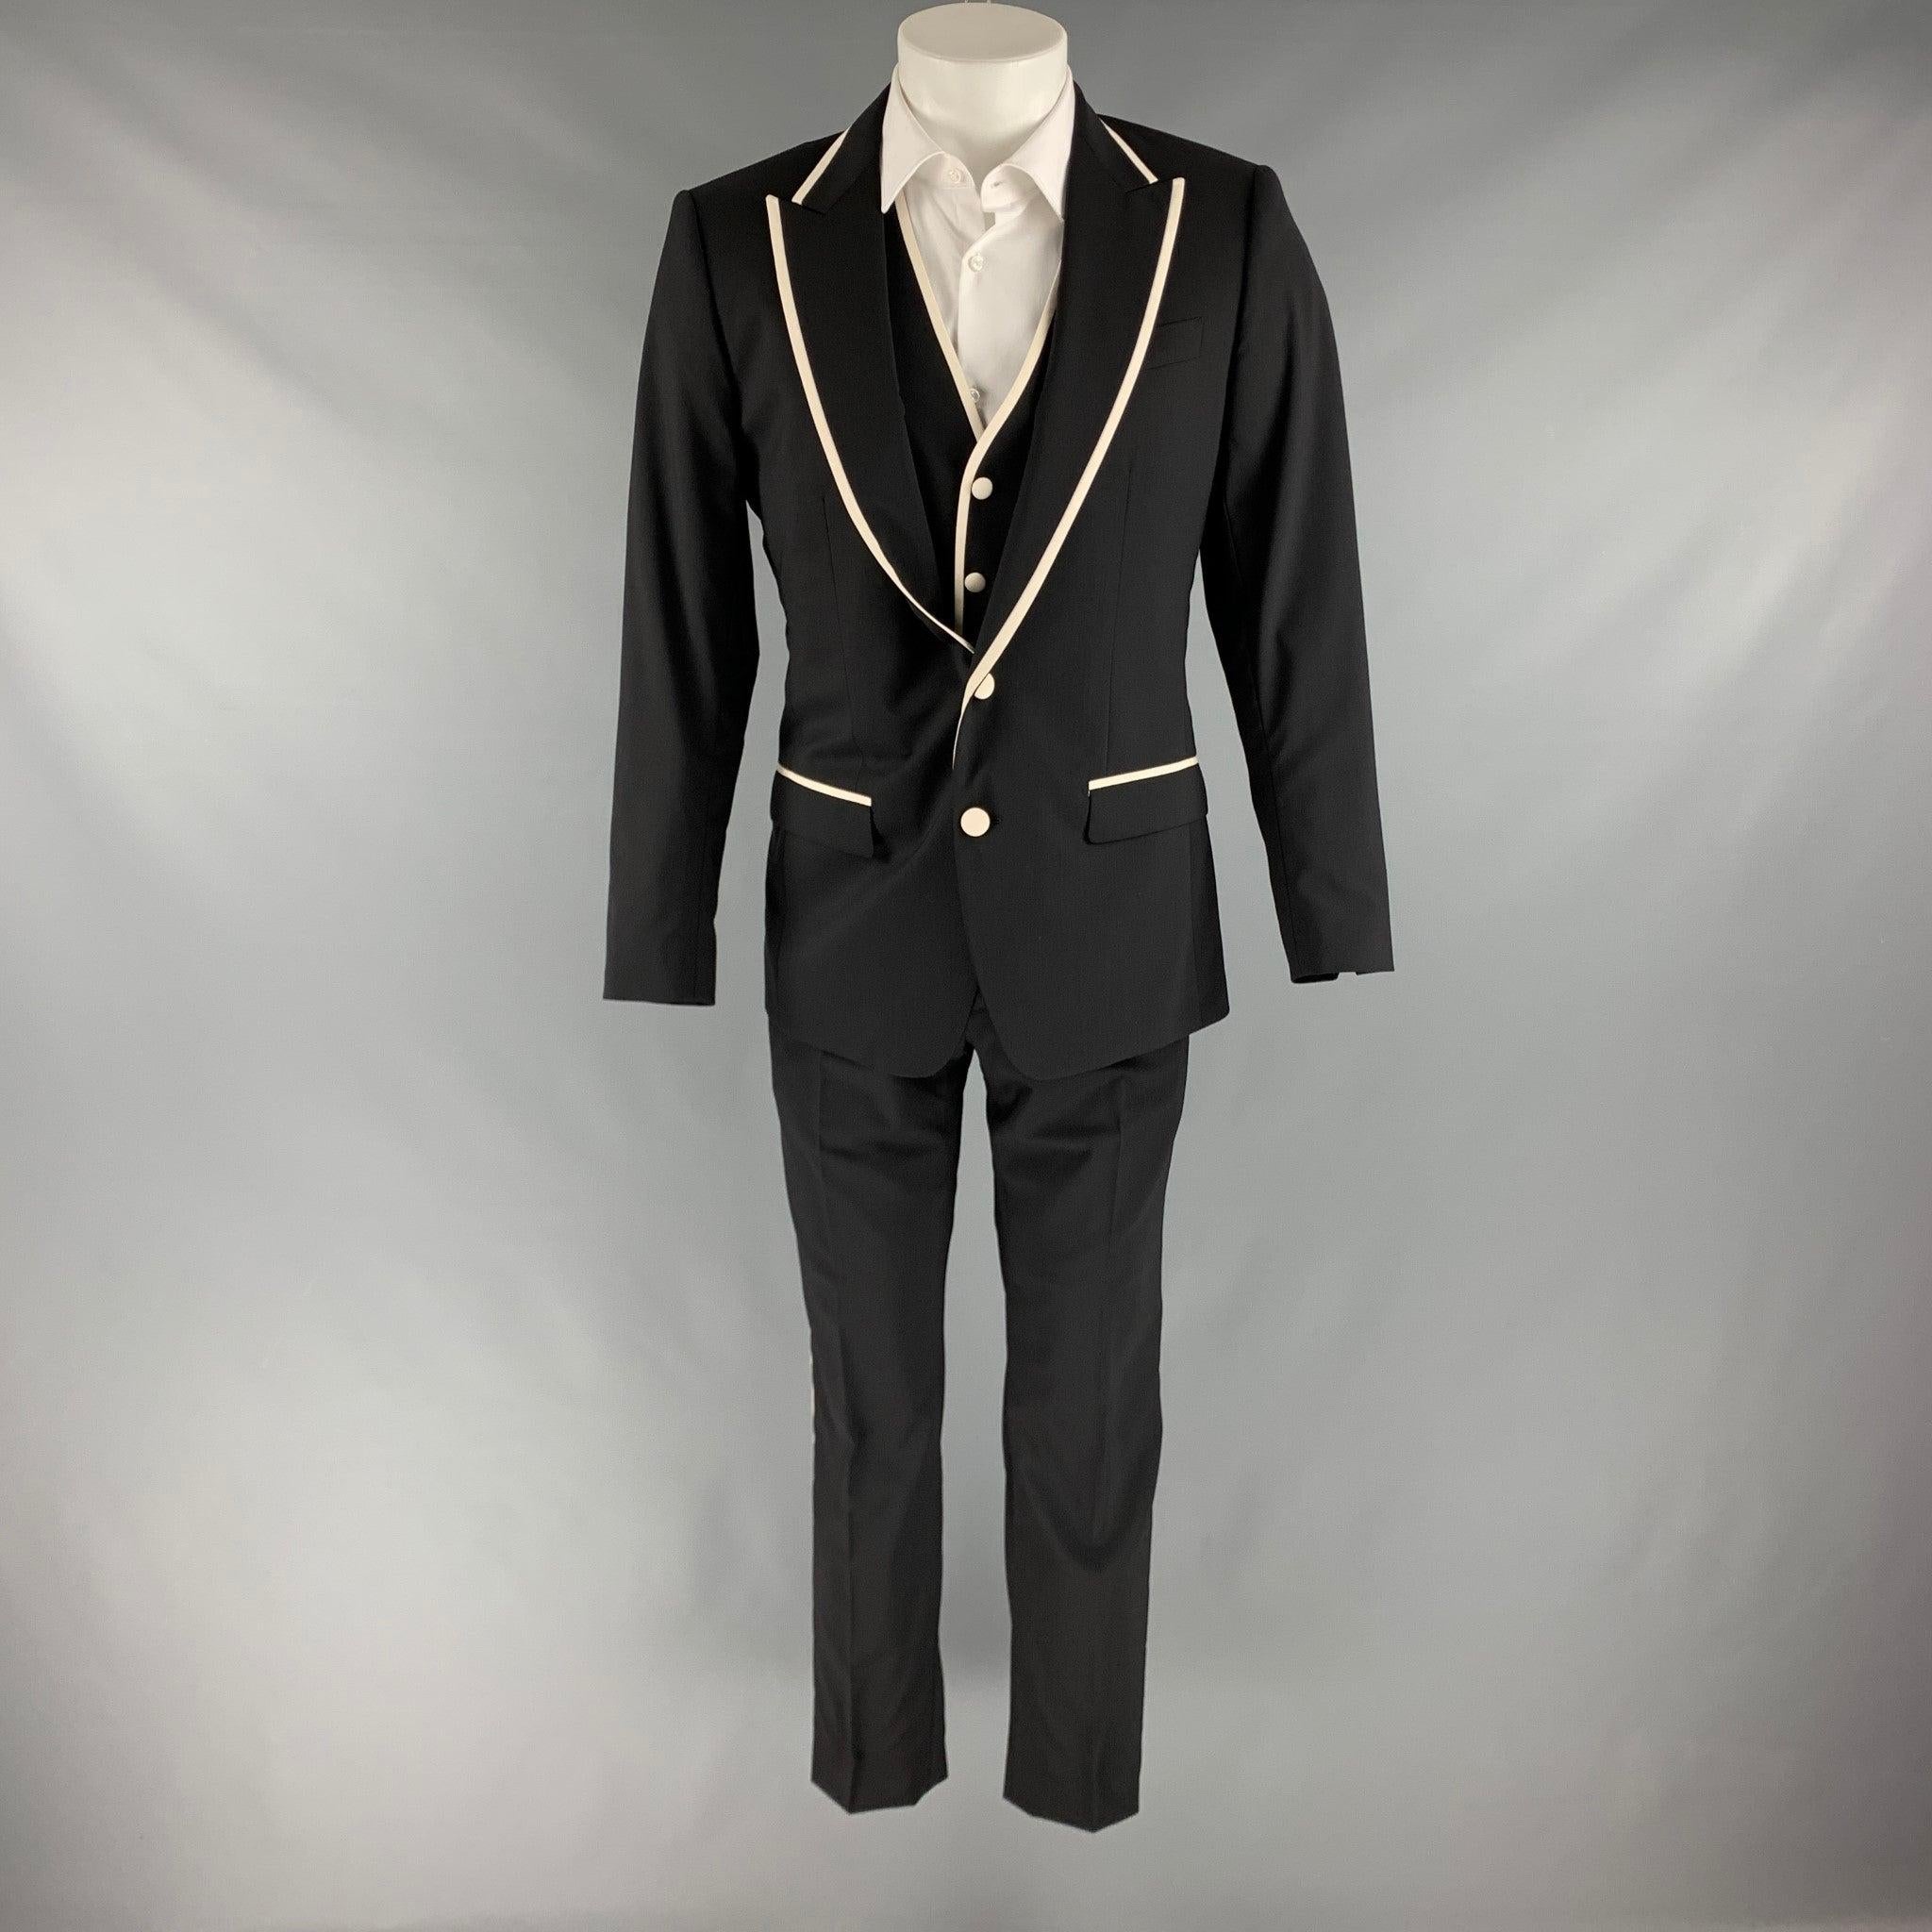 DOLCE & GABBANA
suit in a black wool blend with white trim, featuring
 a full liner and includes a single breasted, double button sport coat with peak lapel and matching flat front trousers. Made in Italy.Very Good Pre-Owned Condition. 

Marked:  